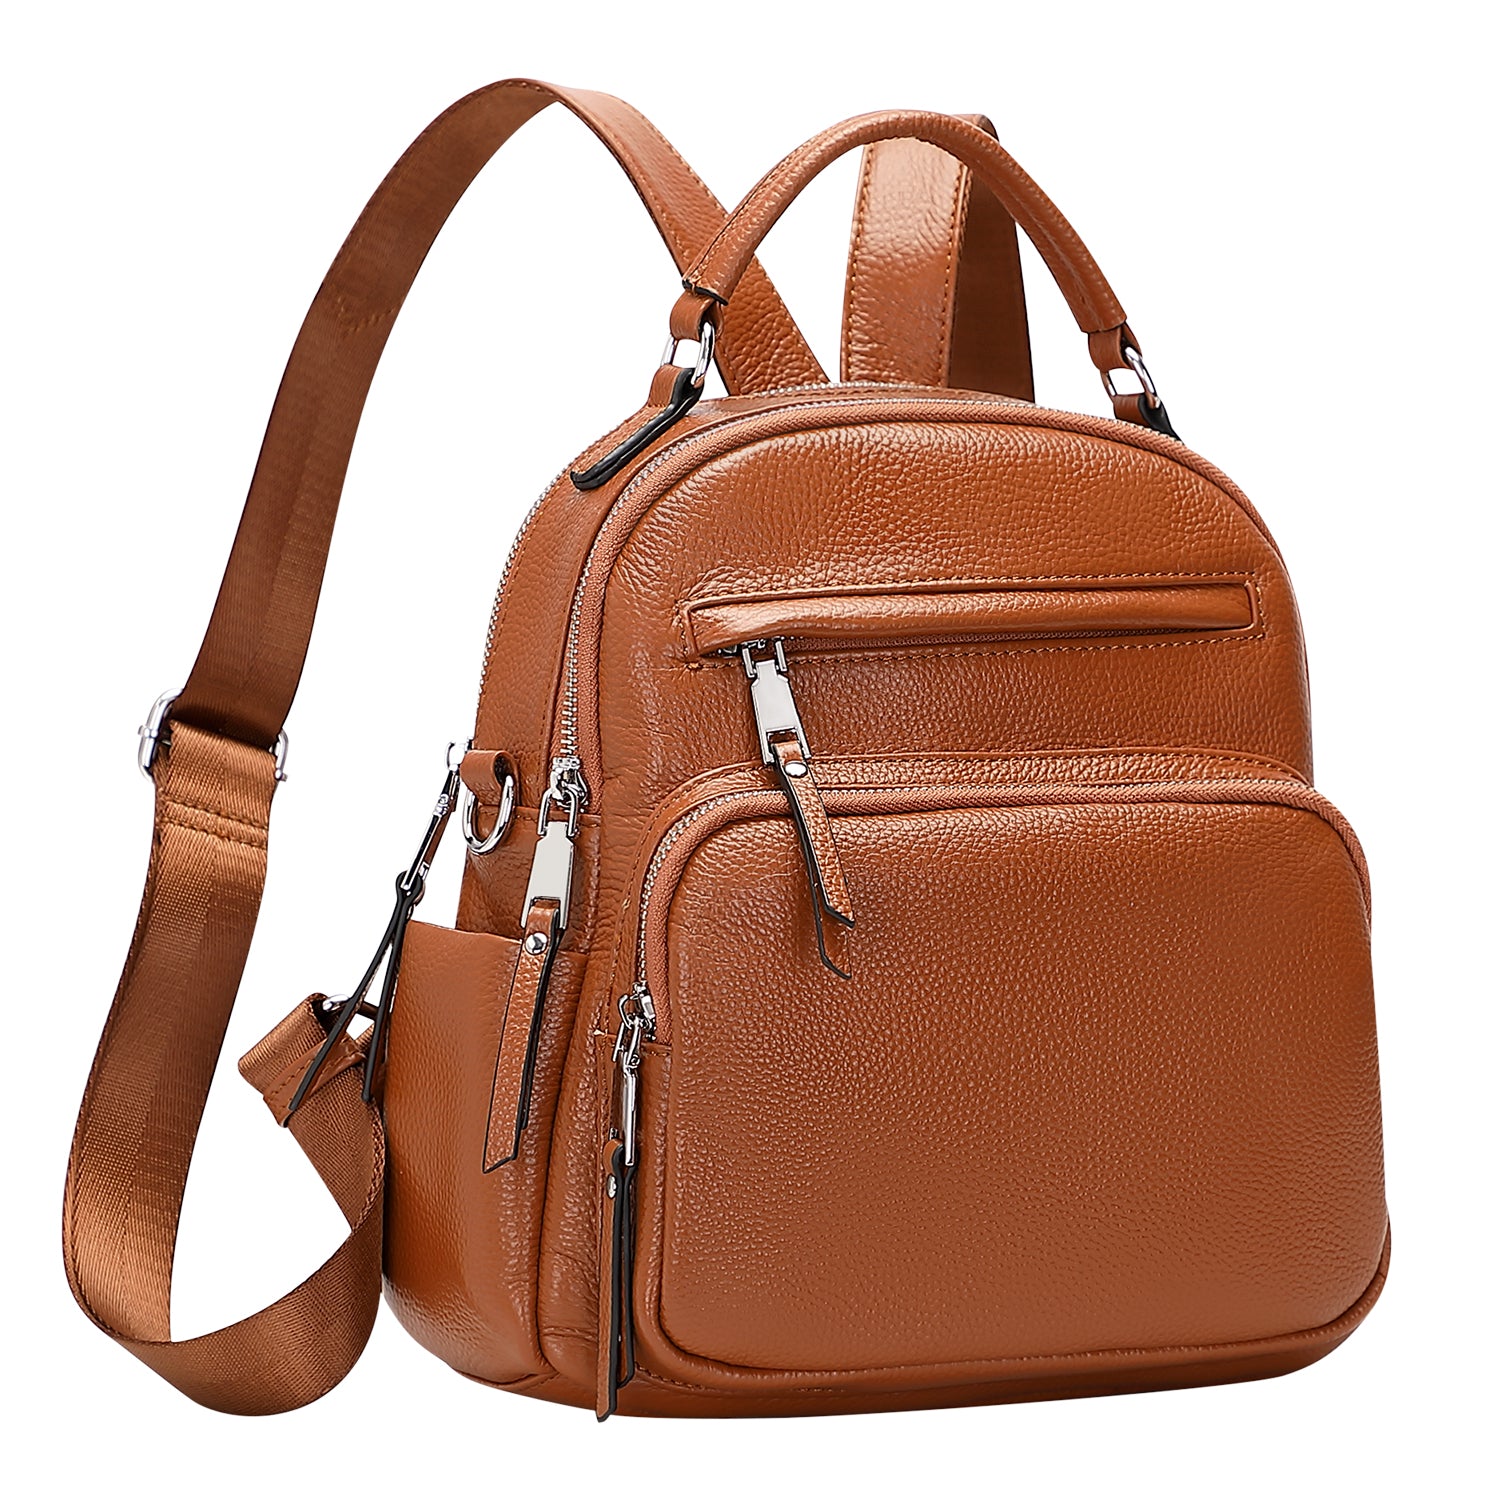 ALTOSY Genuine Leather Backpack for Women Small Convertible